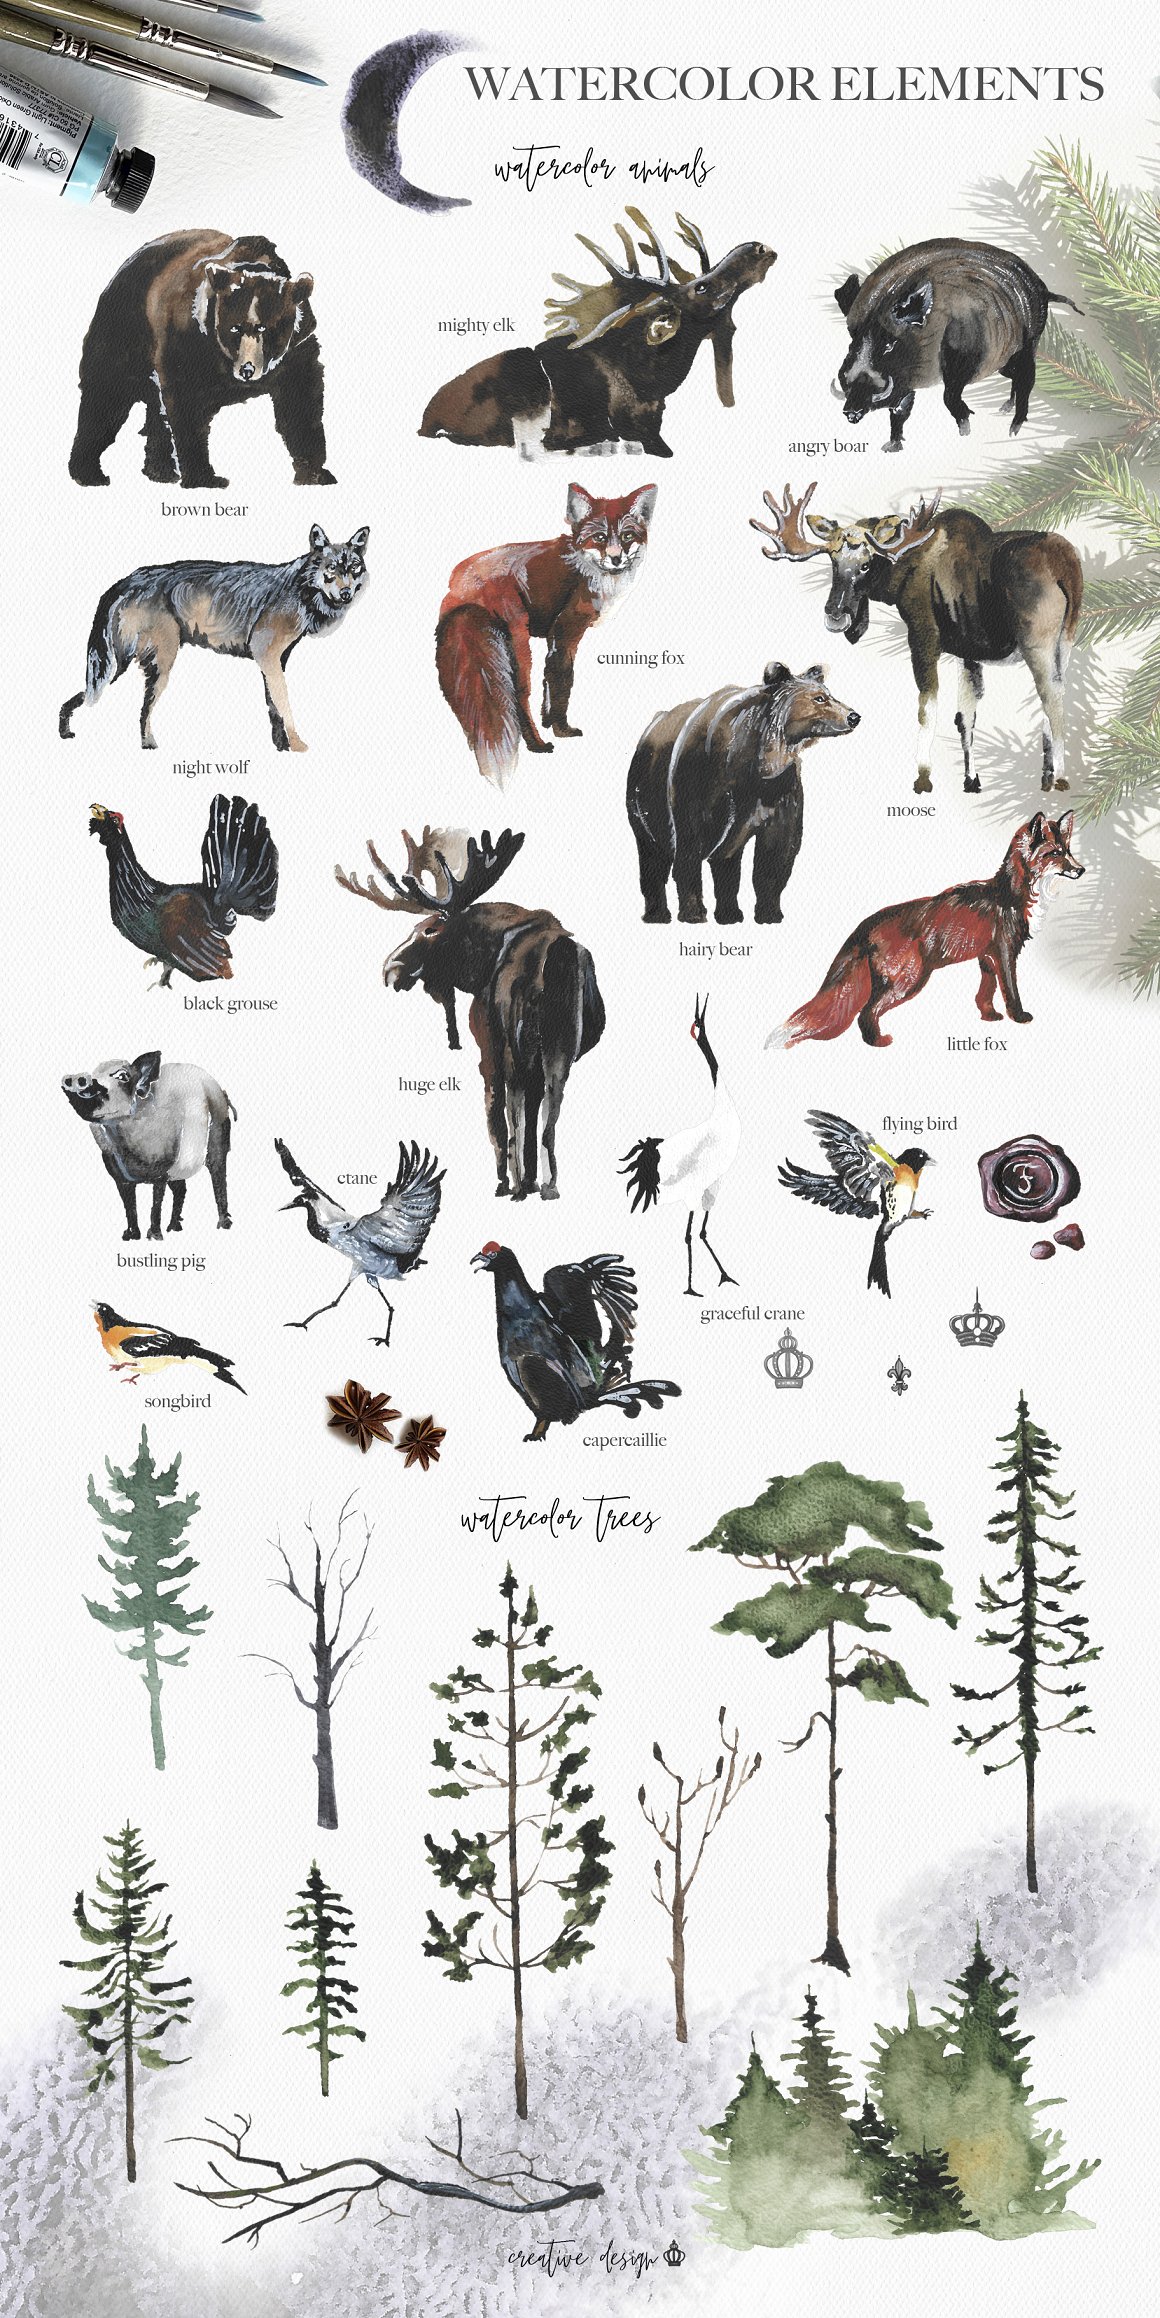 Images of moose and other animals are colored.